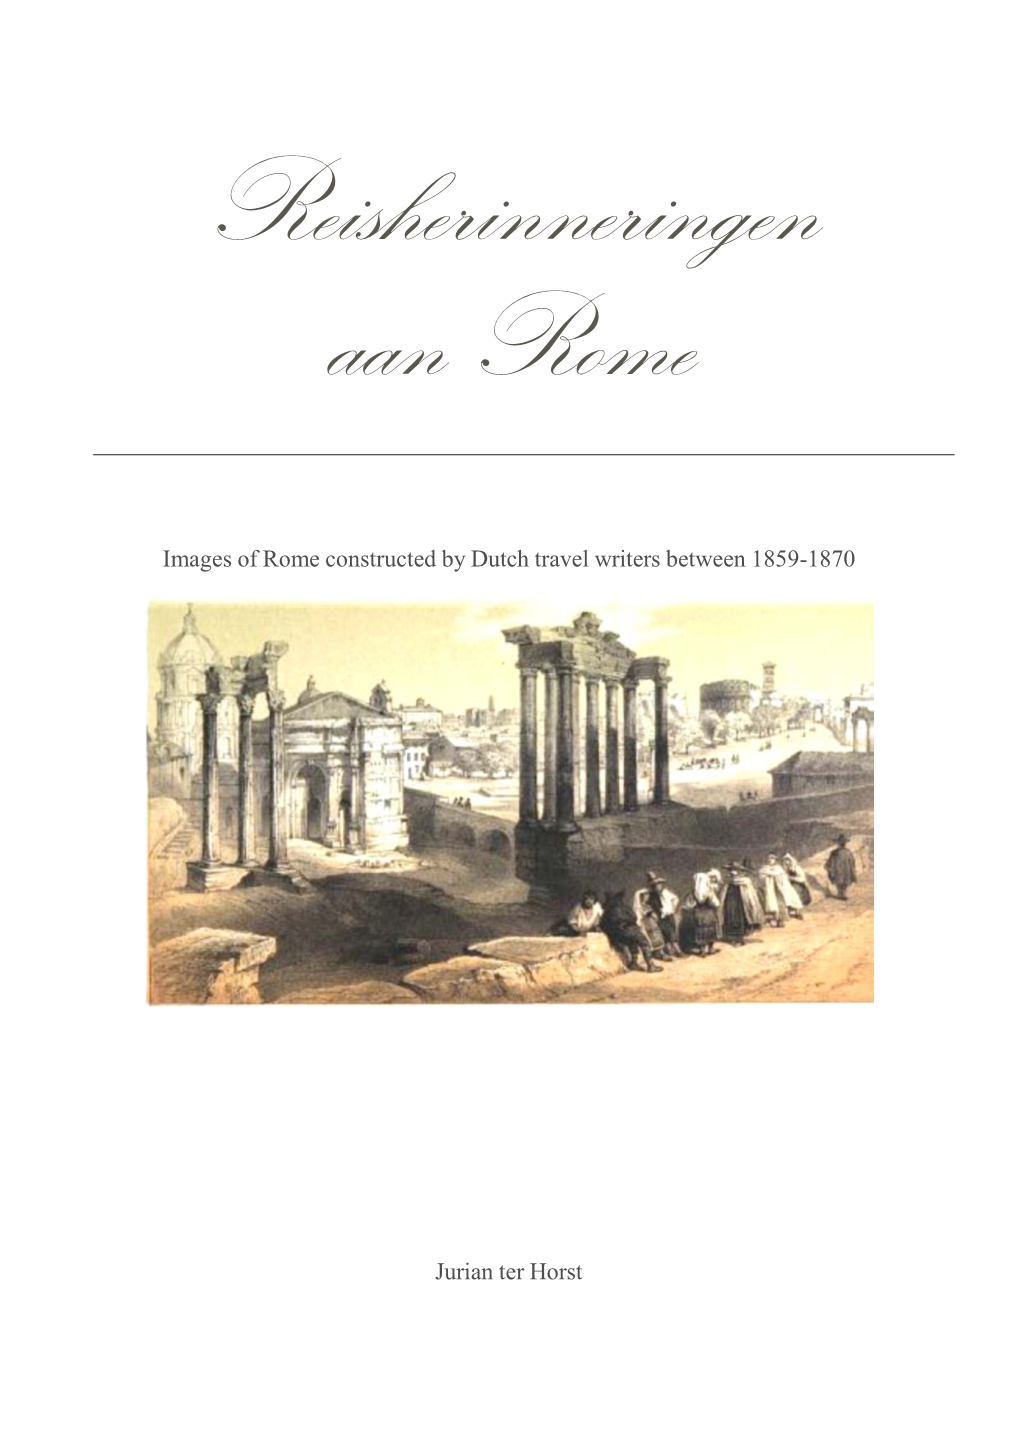 Images of Rome Constructed by Dutch Travel Writers Between 1859-1870